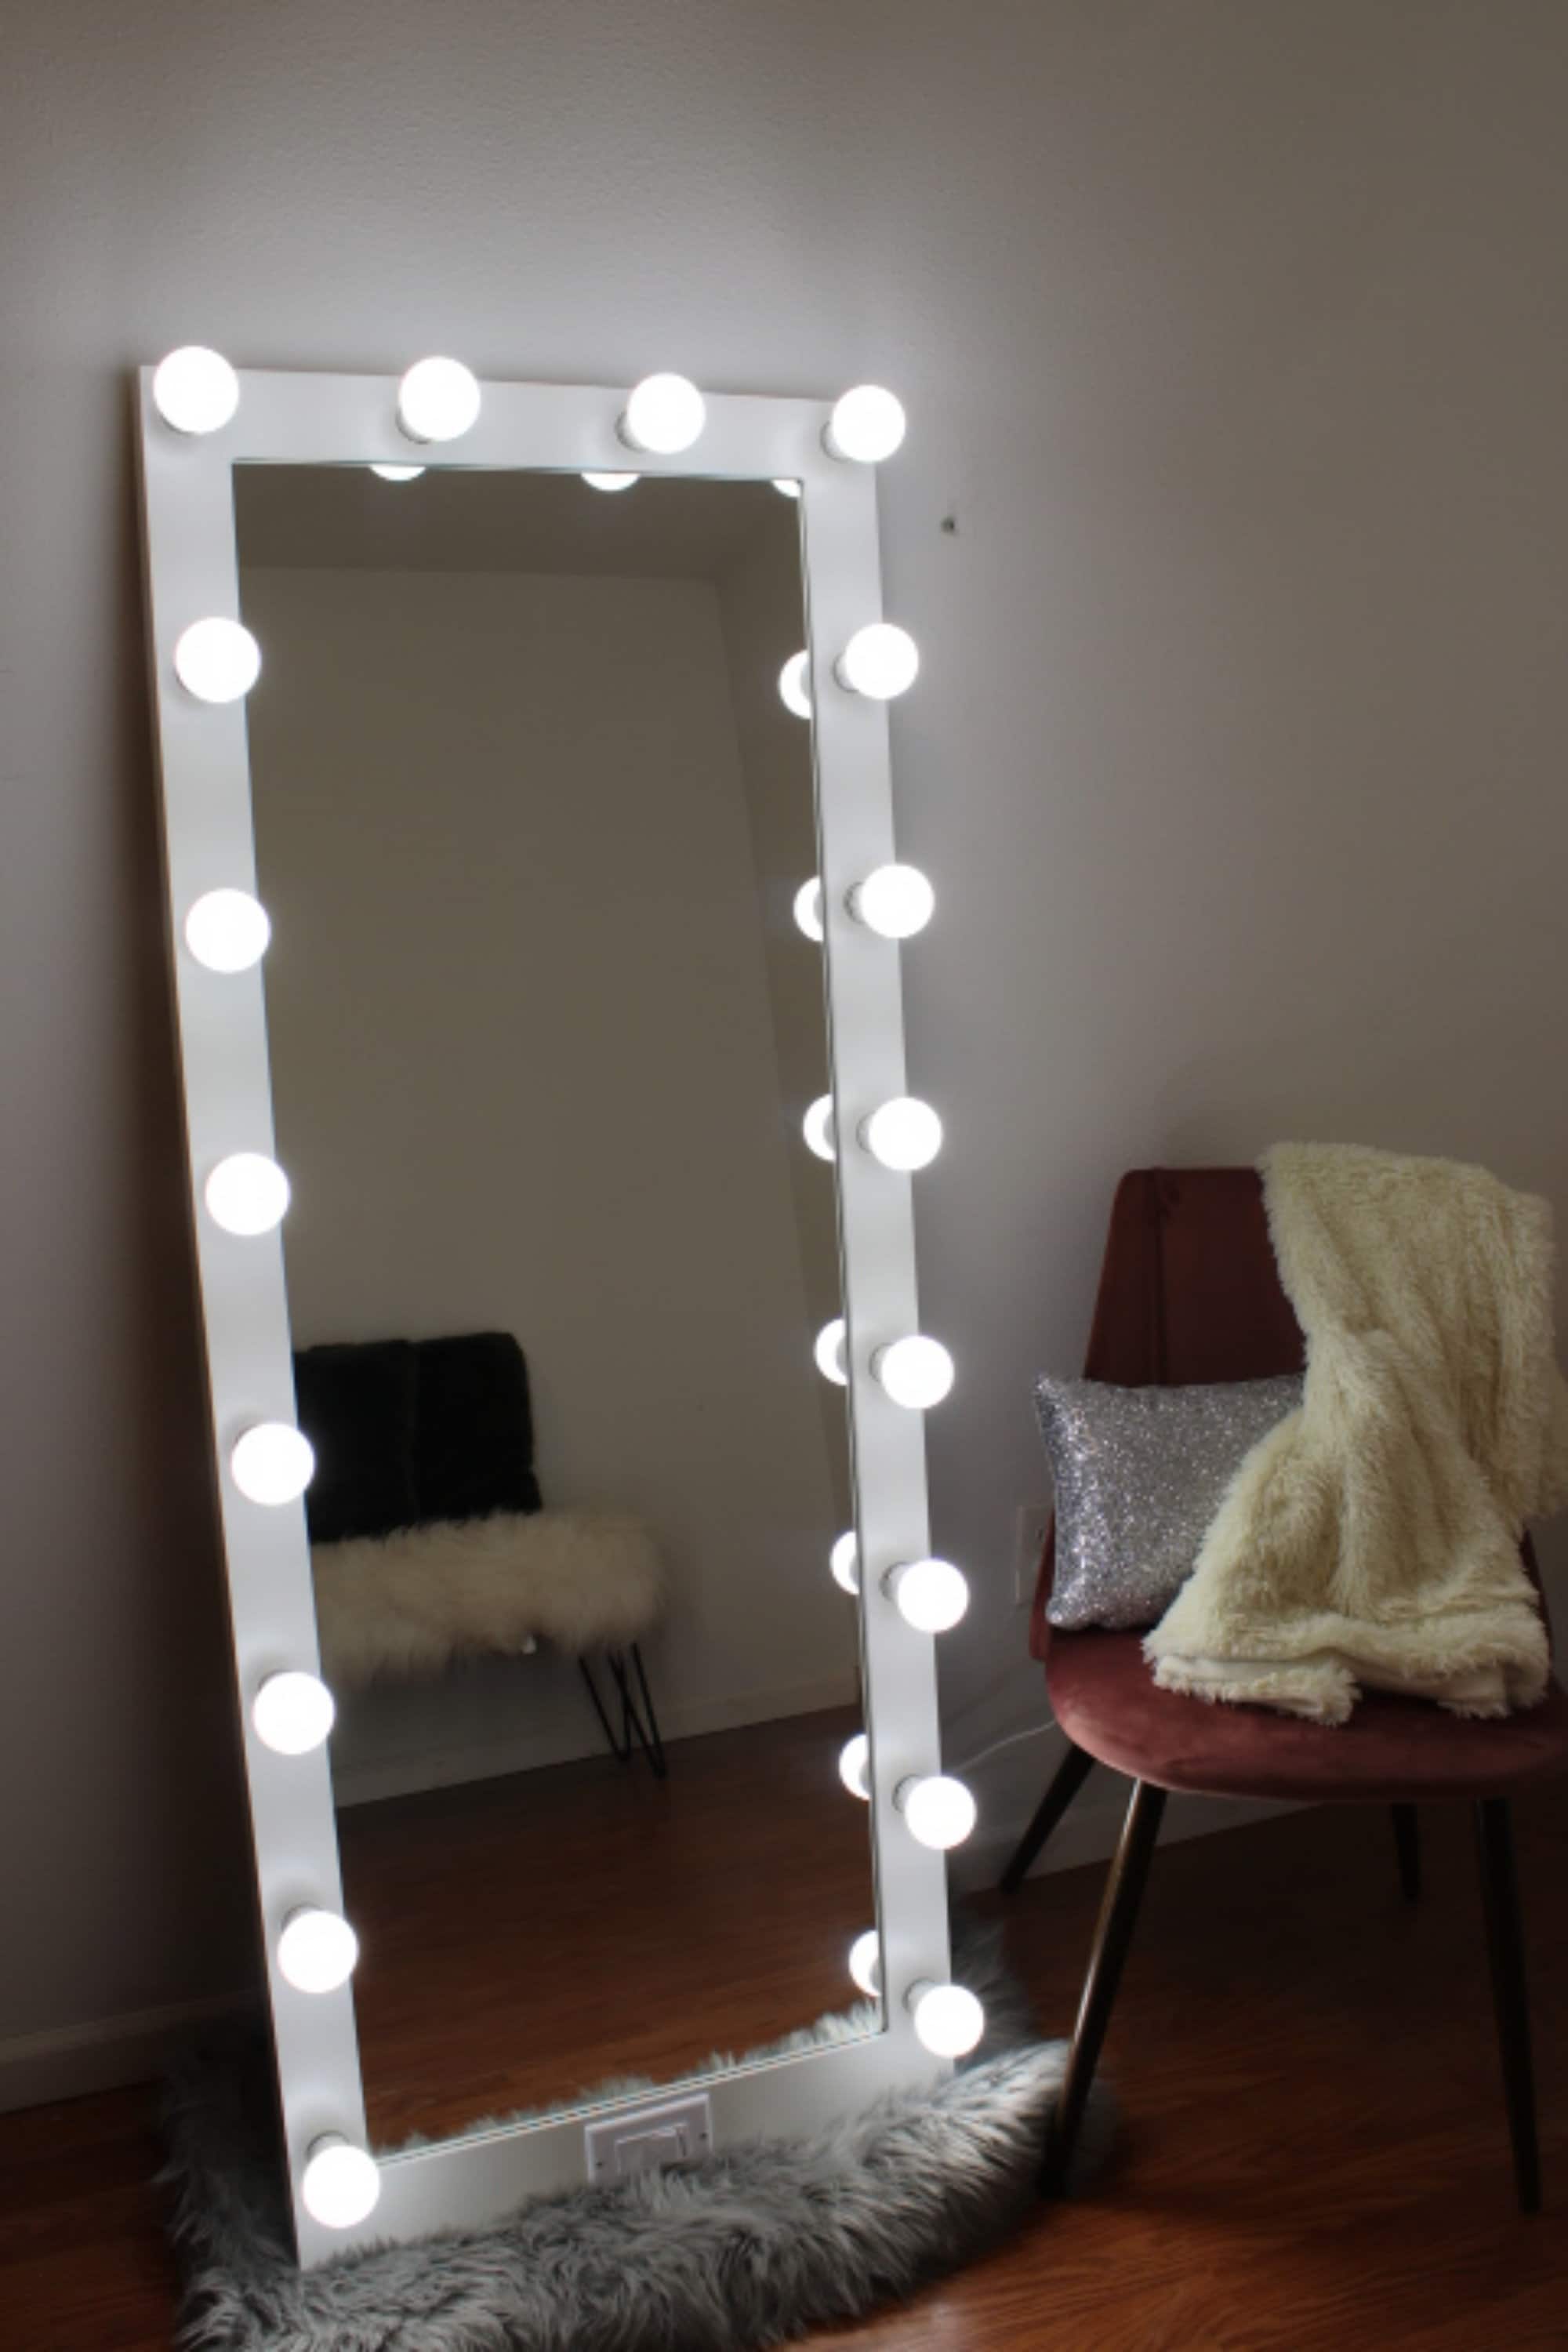 Full Length Mirror With Lights: A Reflection Of Perfection